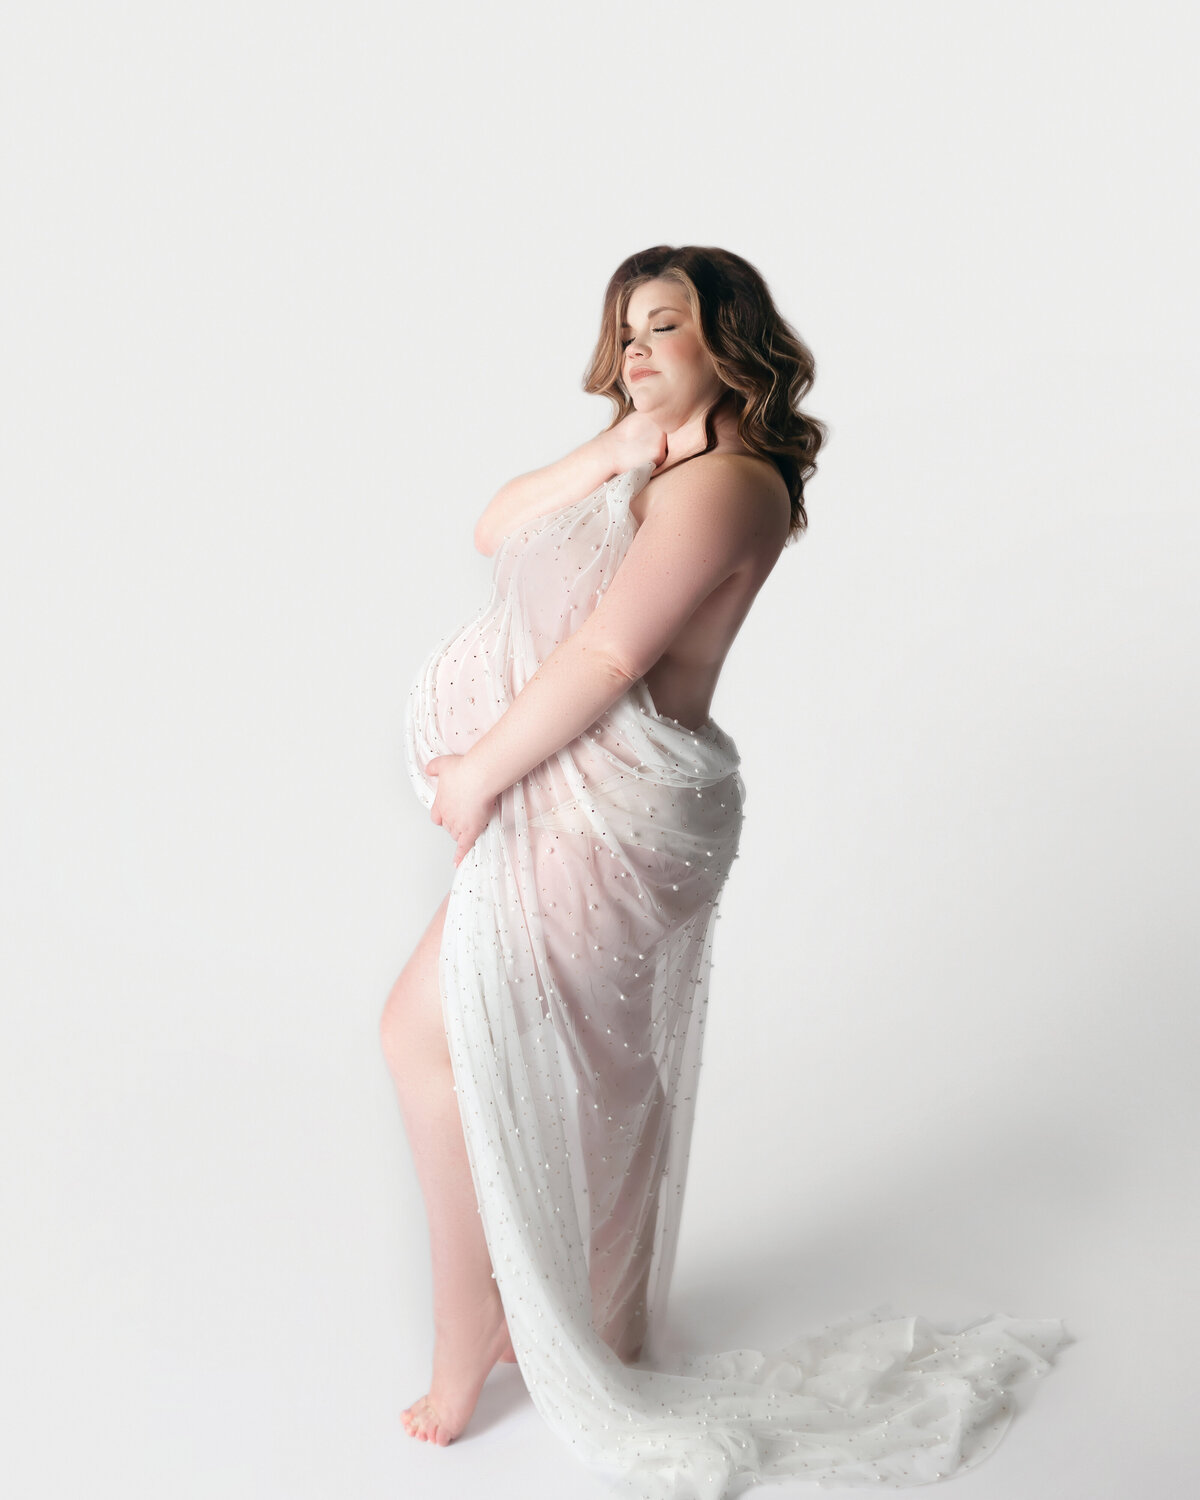 Pregnant women with gown draped over belly during maternity photoshoot in Brentwood Tennessee photography studio